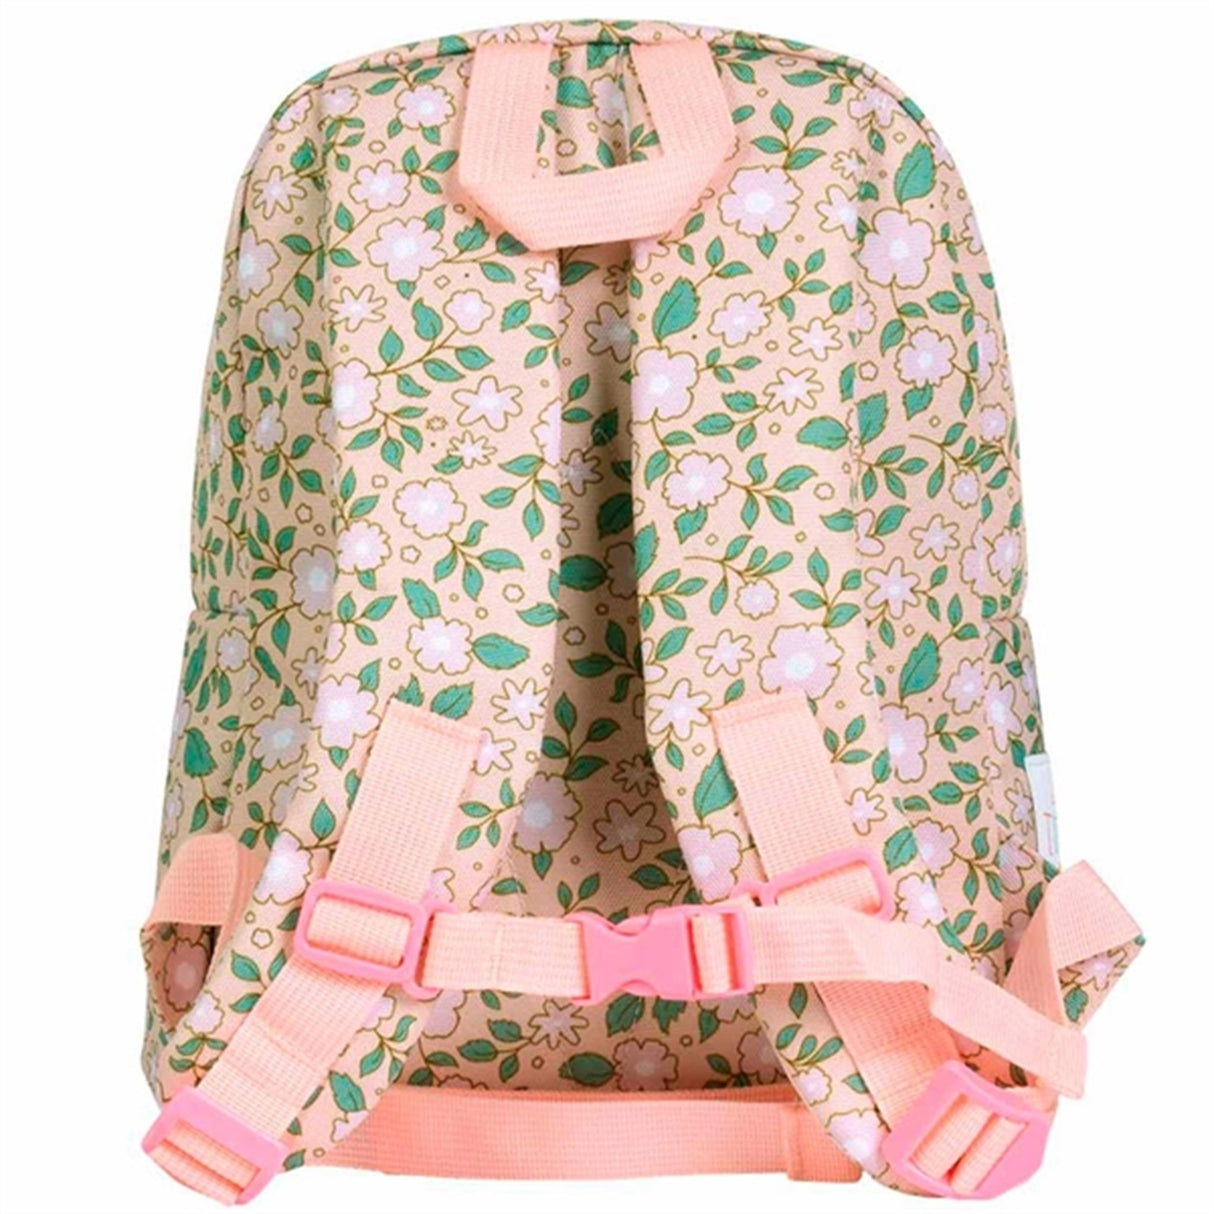 A Little Lovely Company Backpack Small Blossom Pink 3